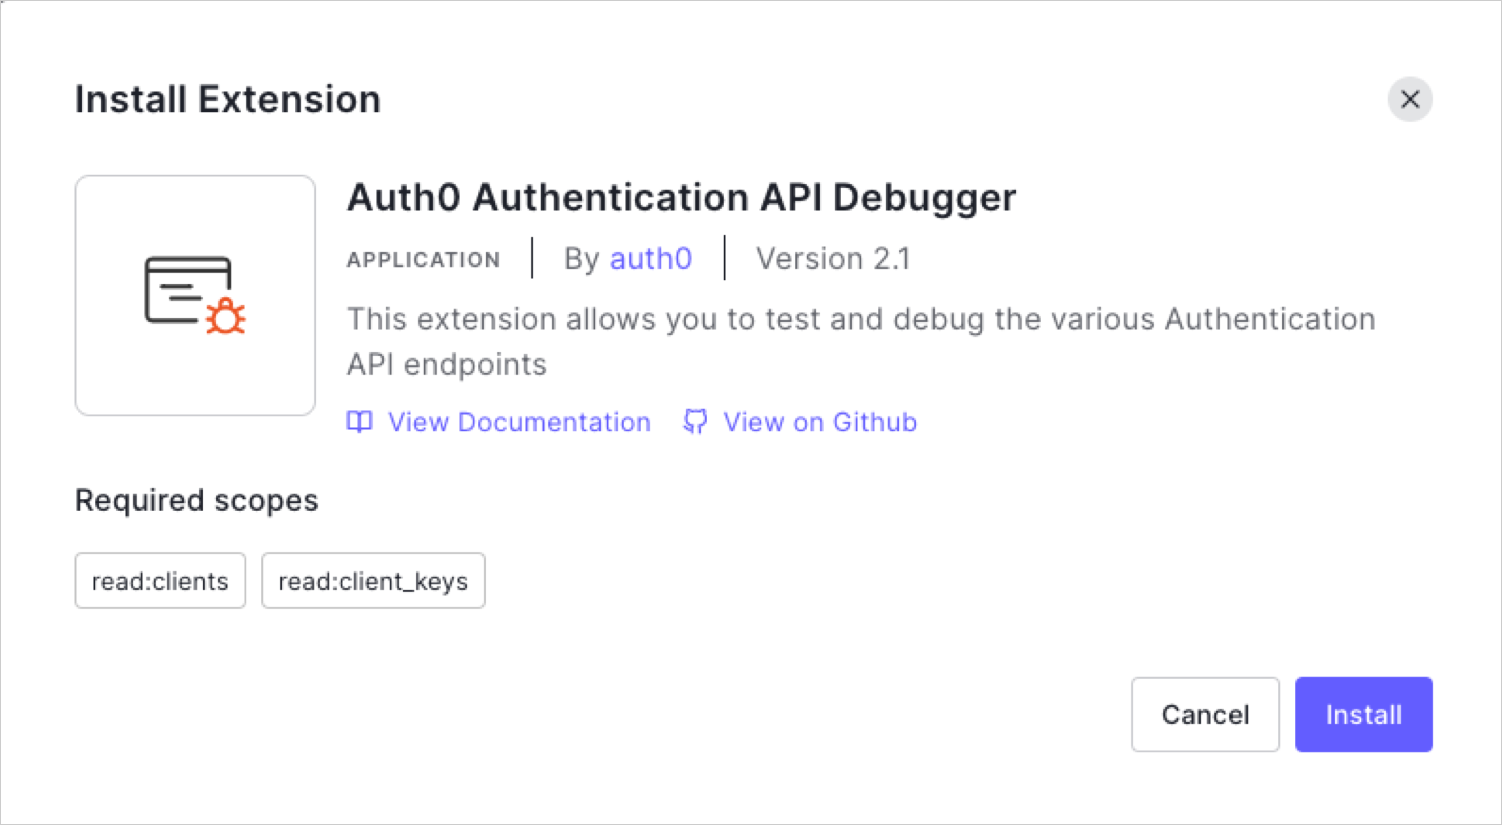 Dashboard - Extensions - Auth API Debugger - Install